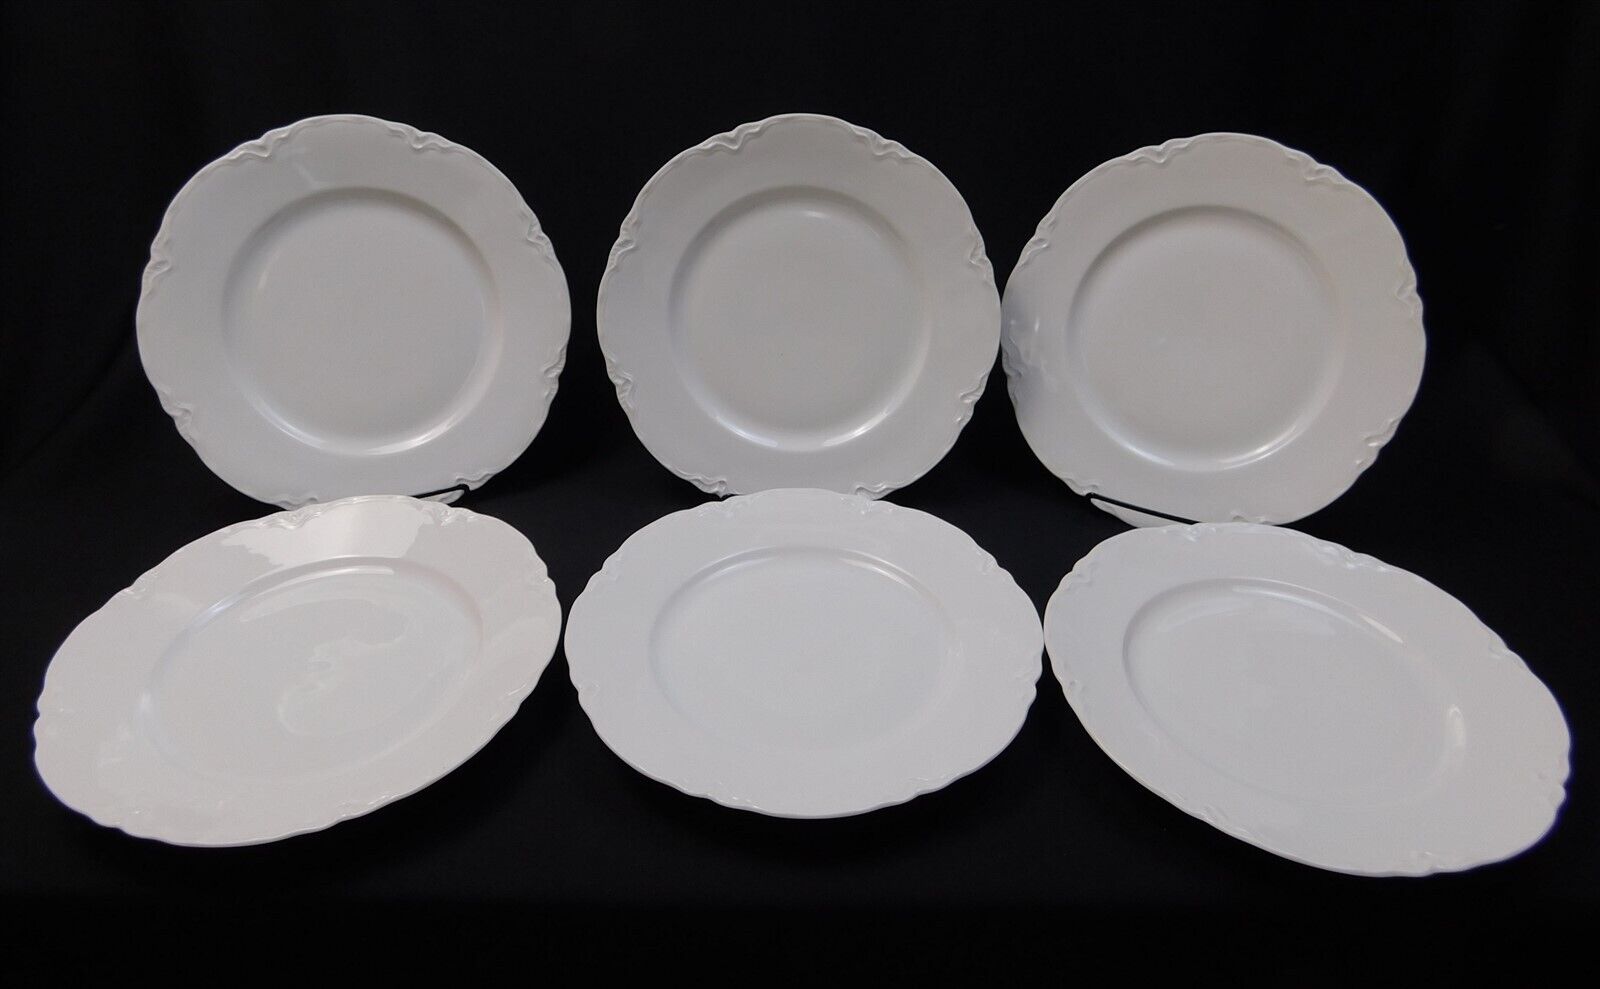 6 HUTSCHENREUTHER Germany Fine China White Dinner Plate 10